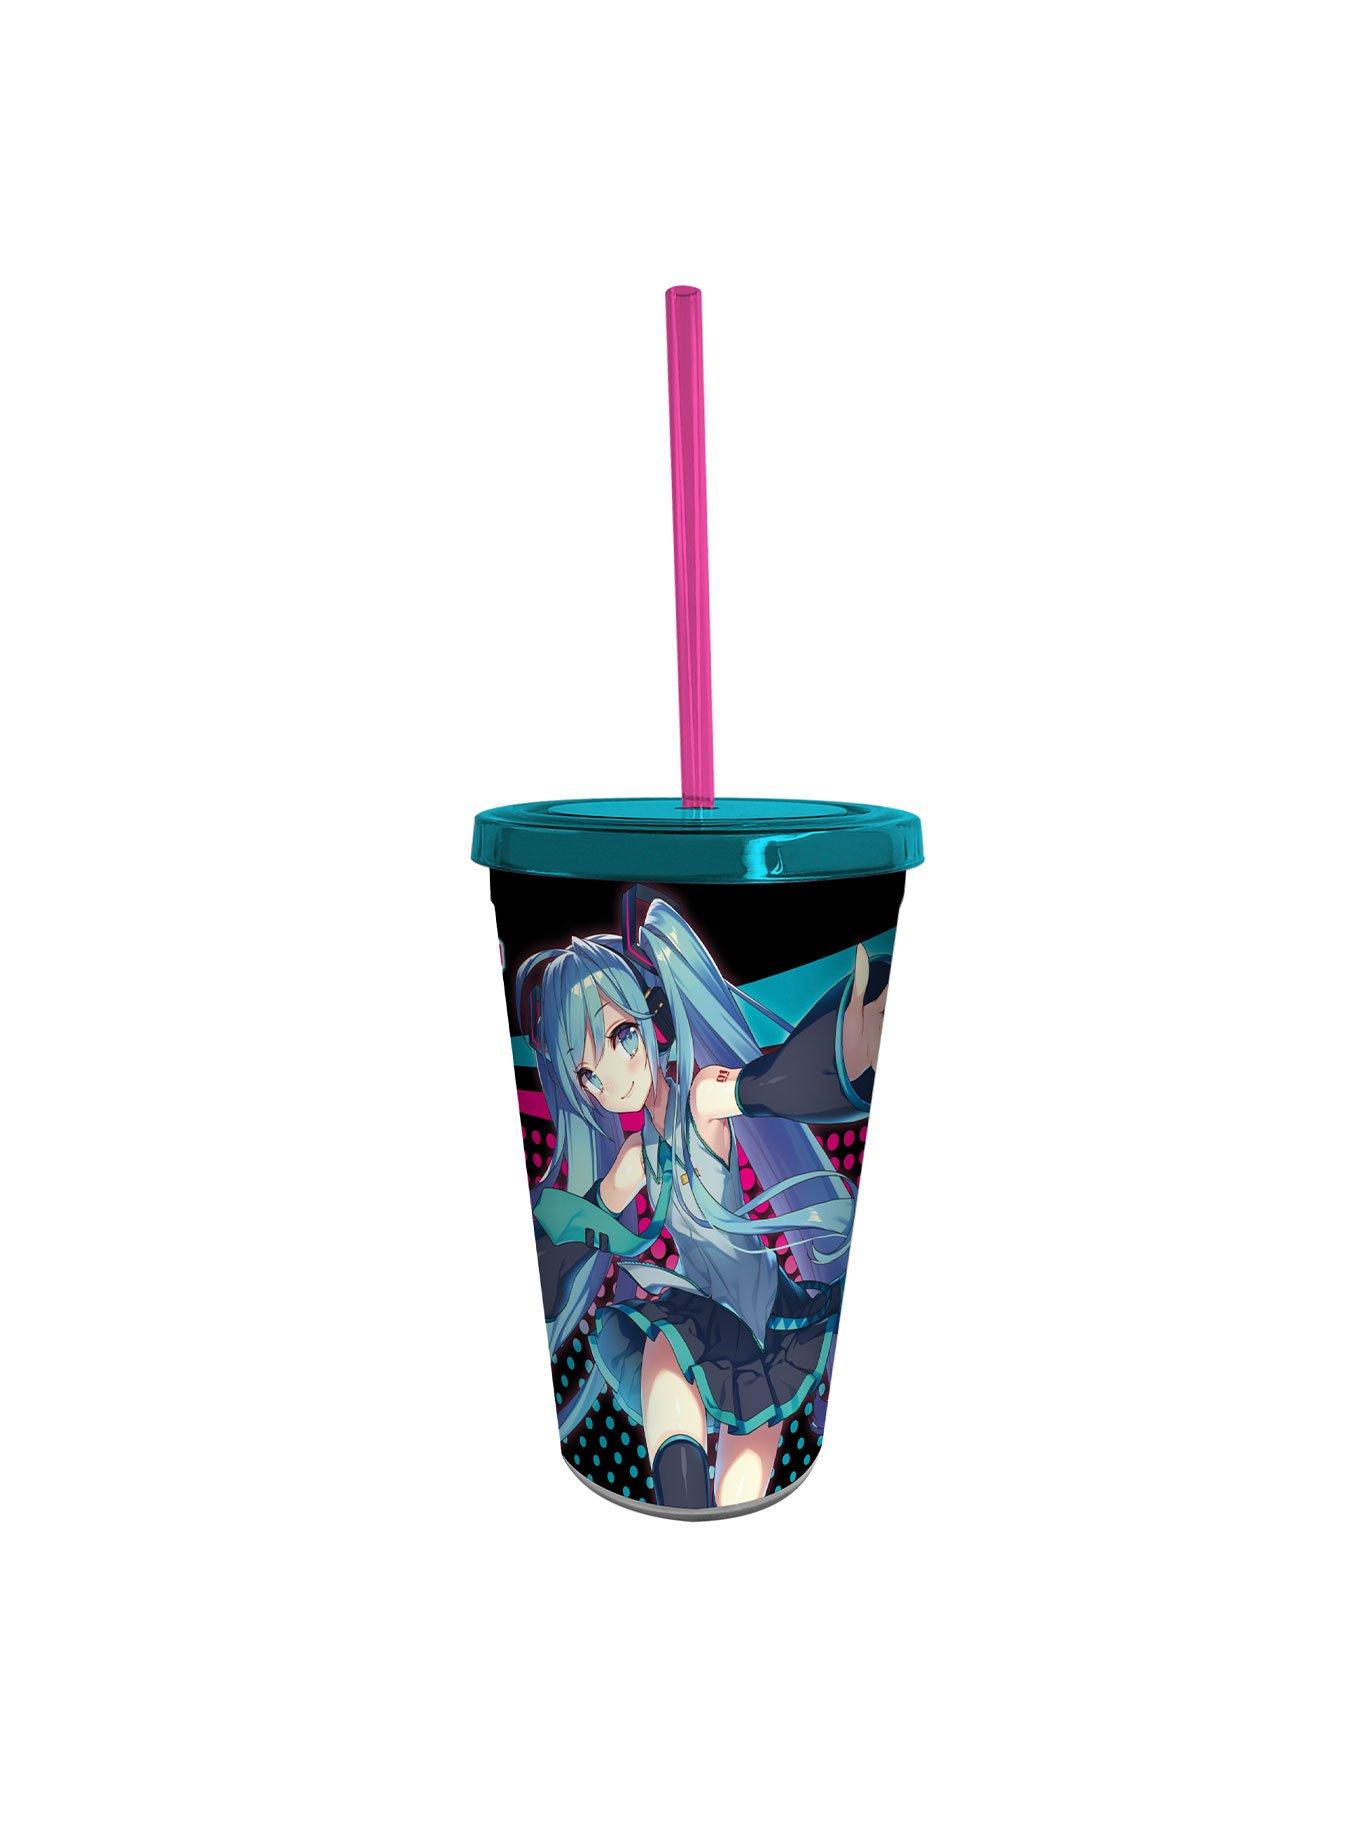 ABYstyle Hatsune Miku Fan and 16oz Tumbler with Straw Set